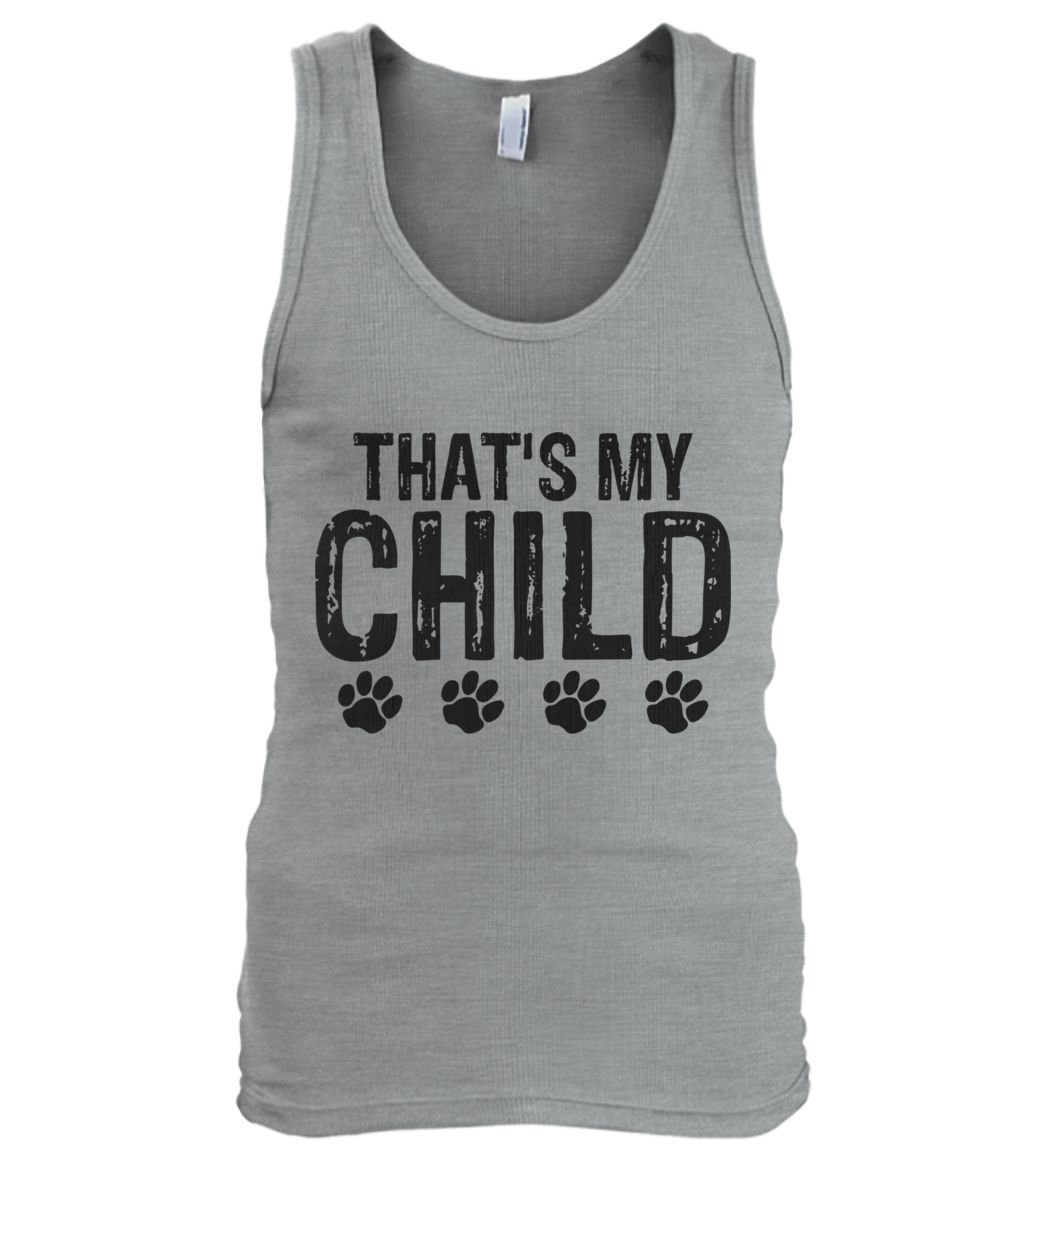 Dog paws that's my child men's tank top